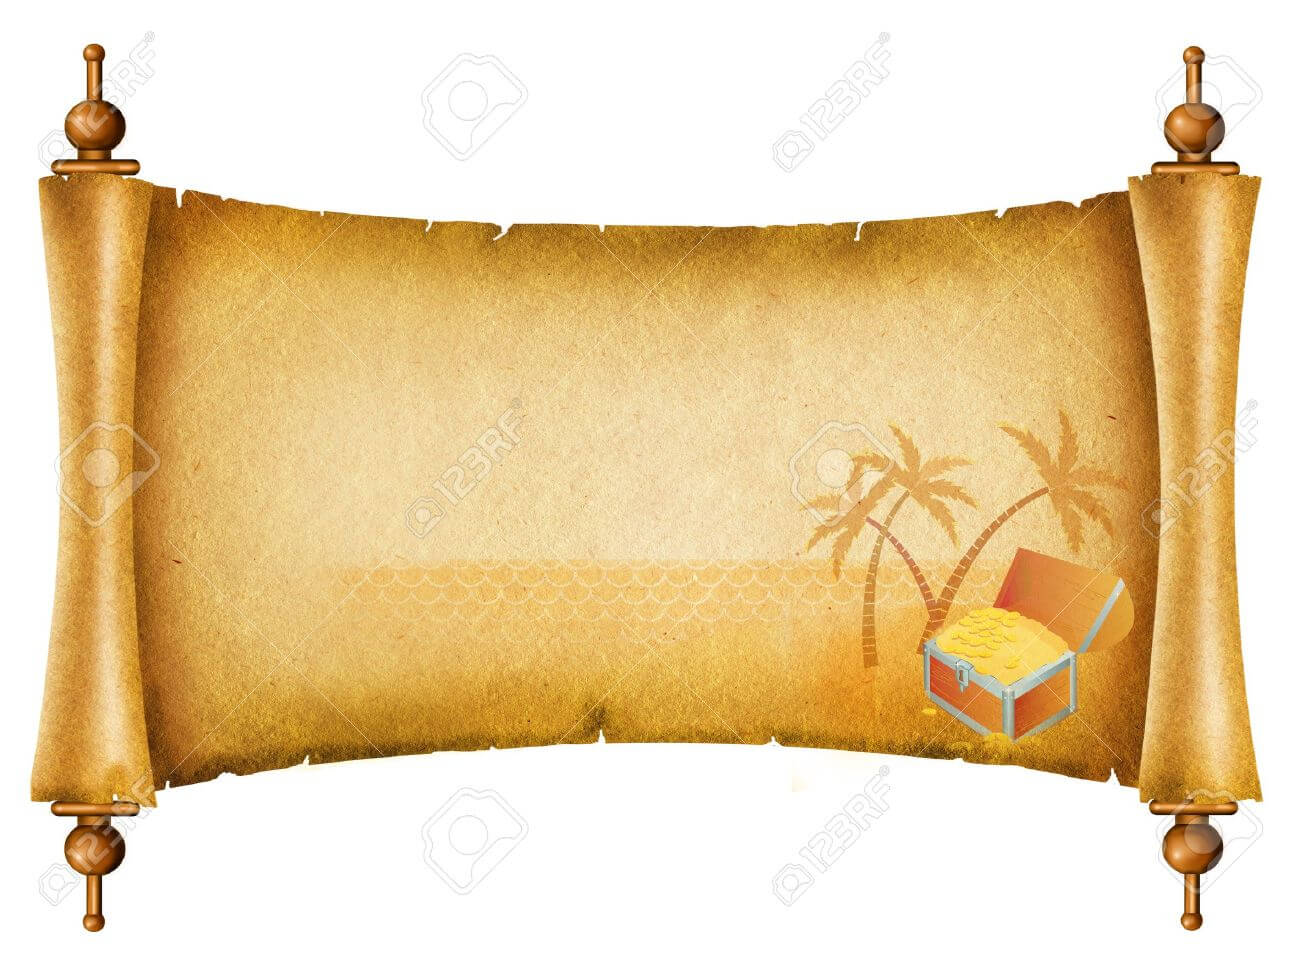 Blank Treasure Map Clipart Pertaining To Blank Pirate Map Template